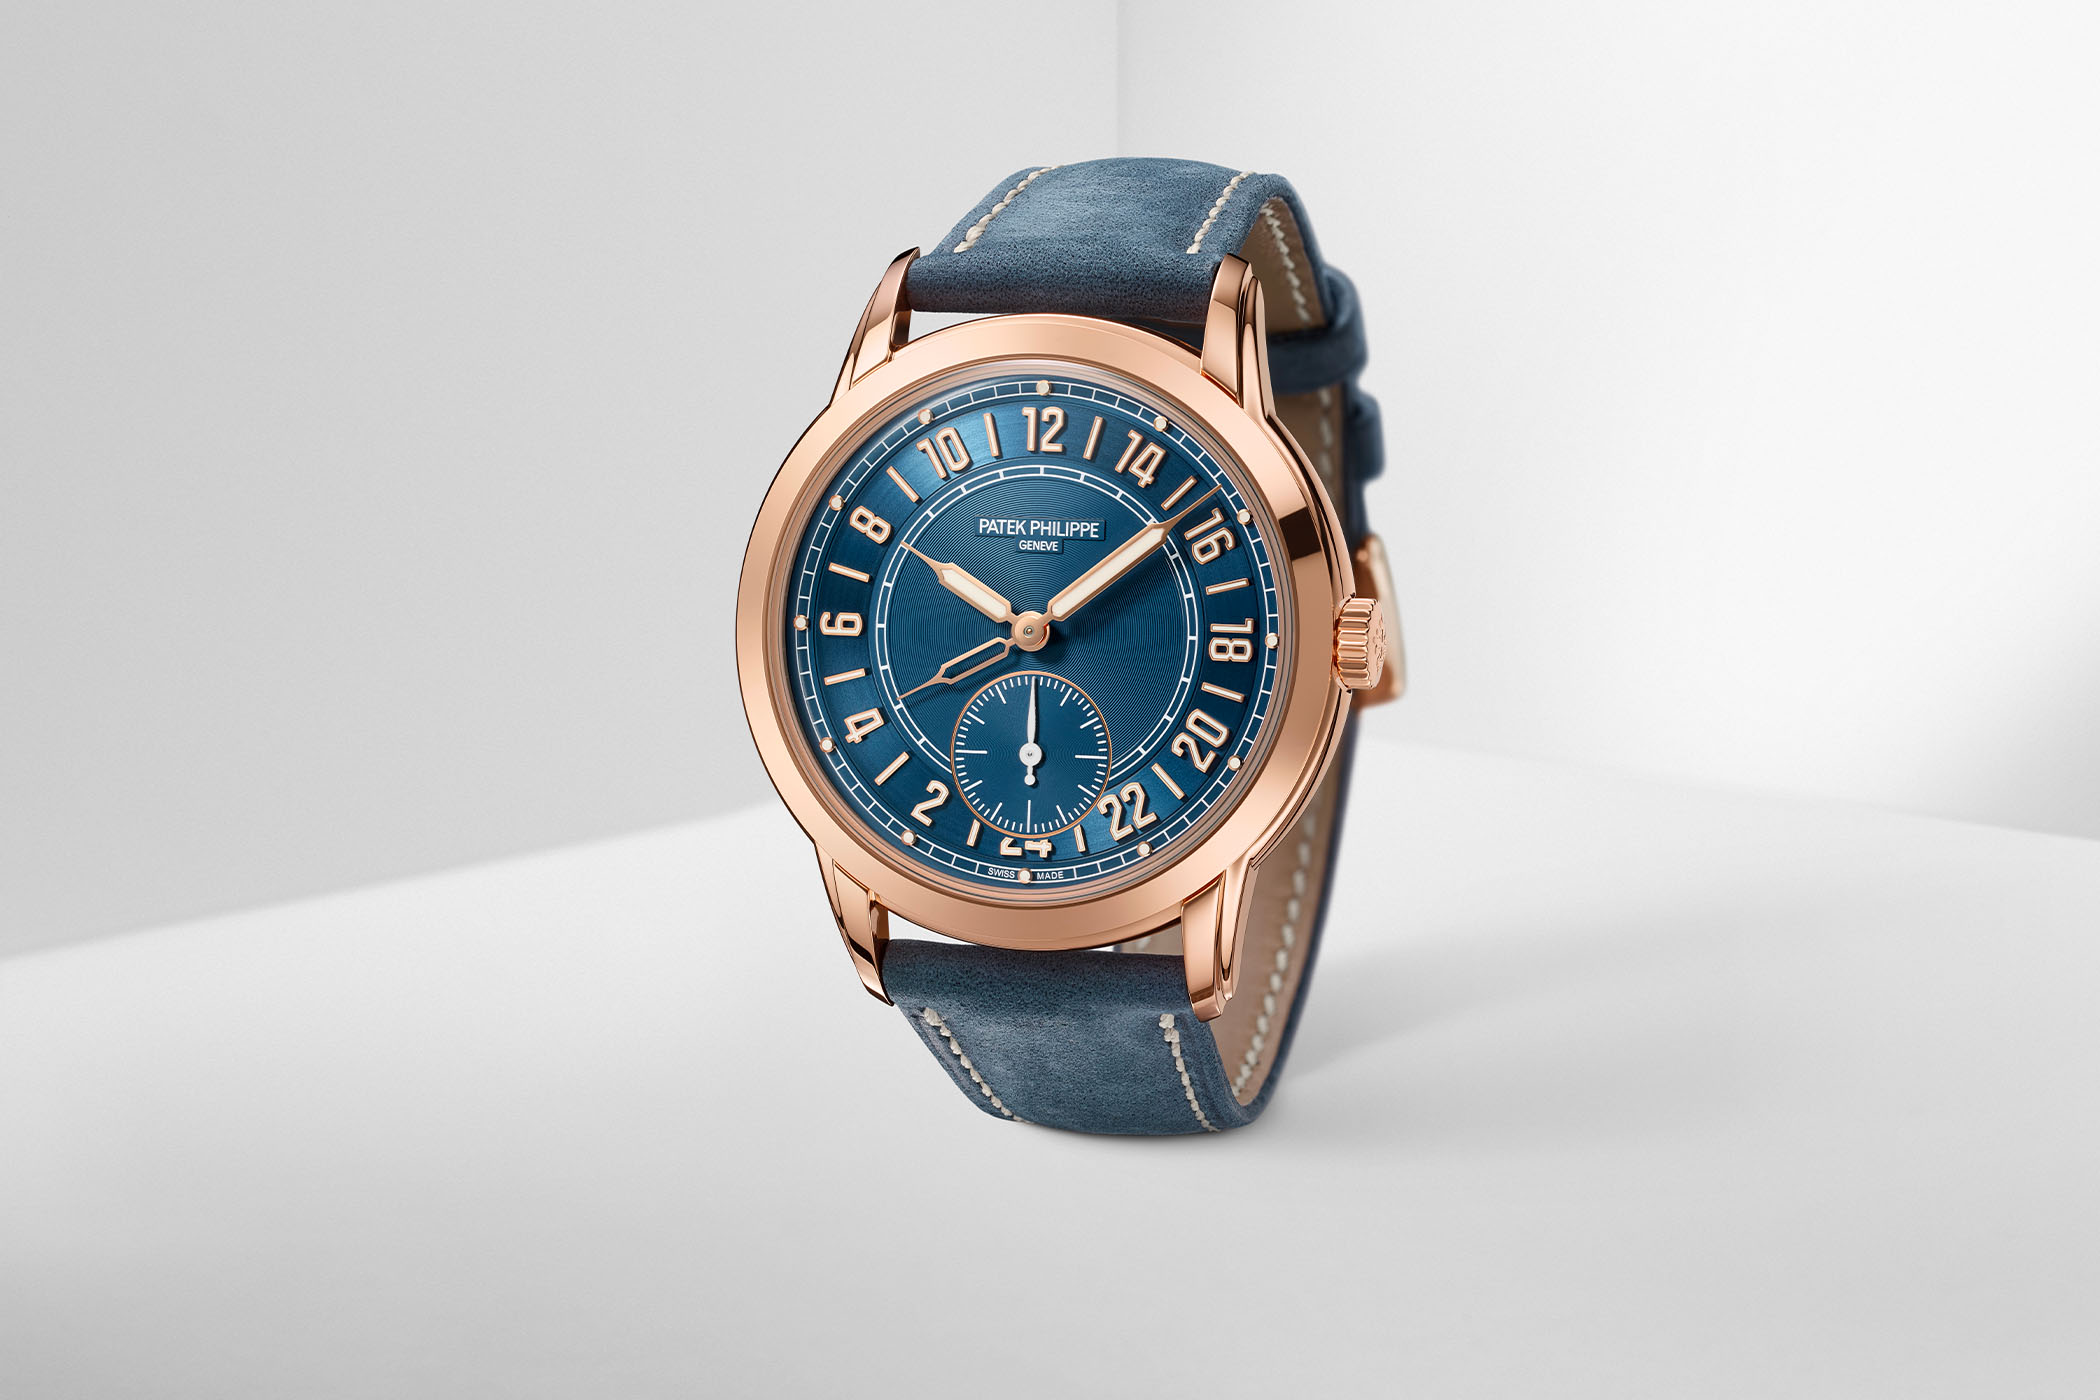 Patek Philippe is expanding its range of travel watches and complications for everyday use with a new Calatrava model equipped with the Travel Time dual time zone function and distinguished by its 24-hour display.